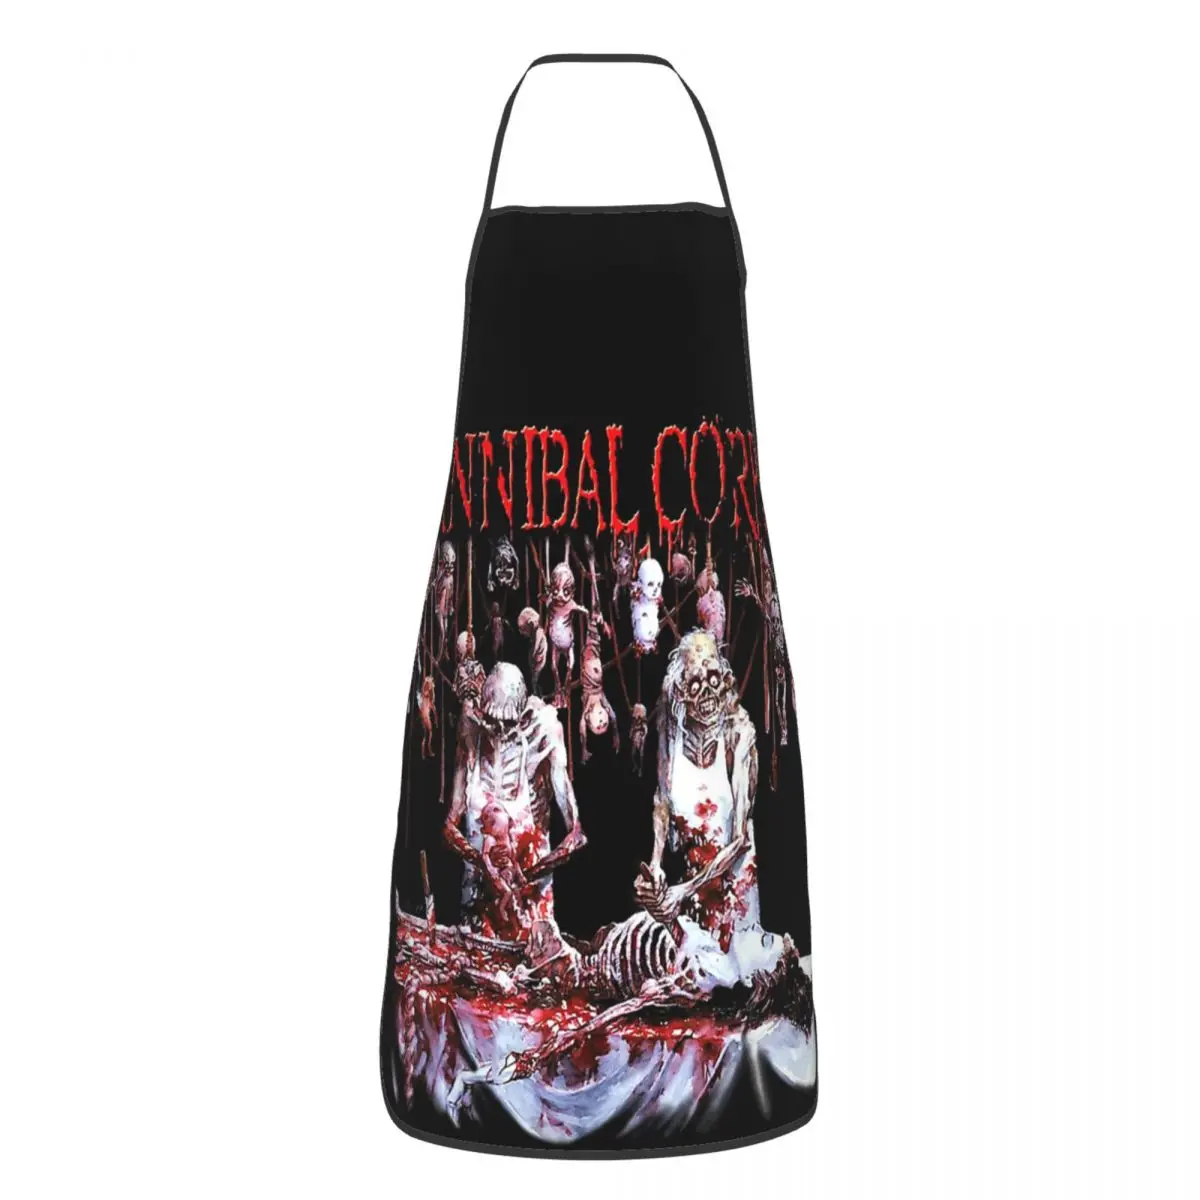 Cannibal Corpse Official Merchandise Butchered At Birth Apron for Women Men Kitchen Chef Cooking Tablier Household Bib Baking